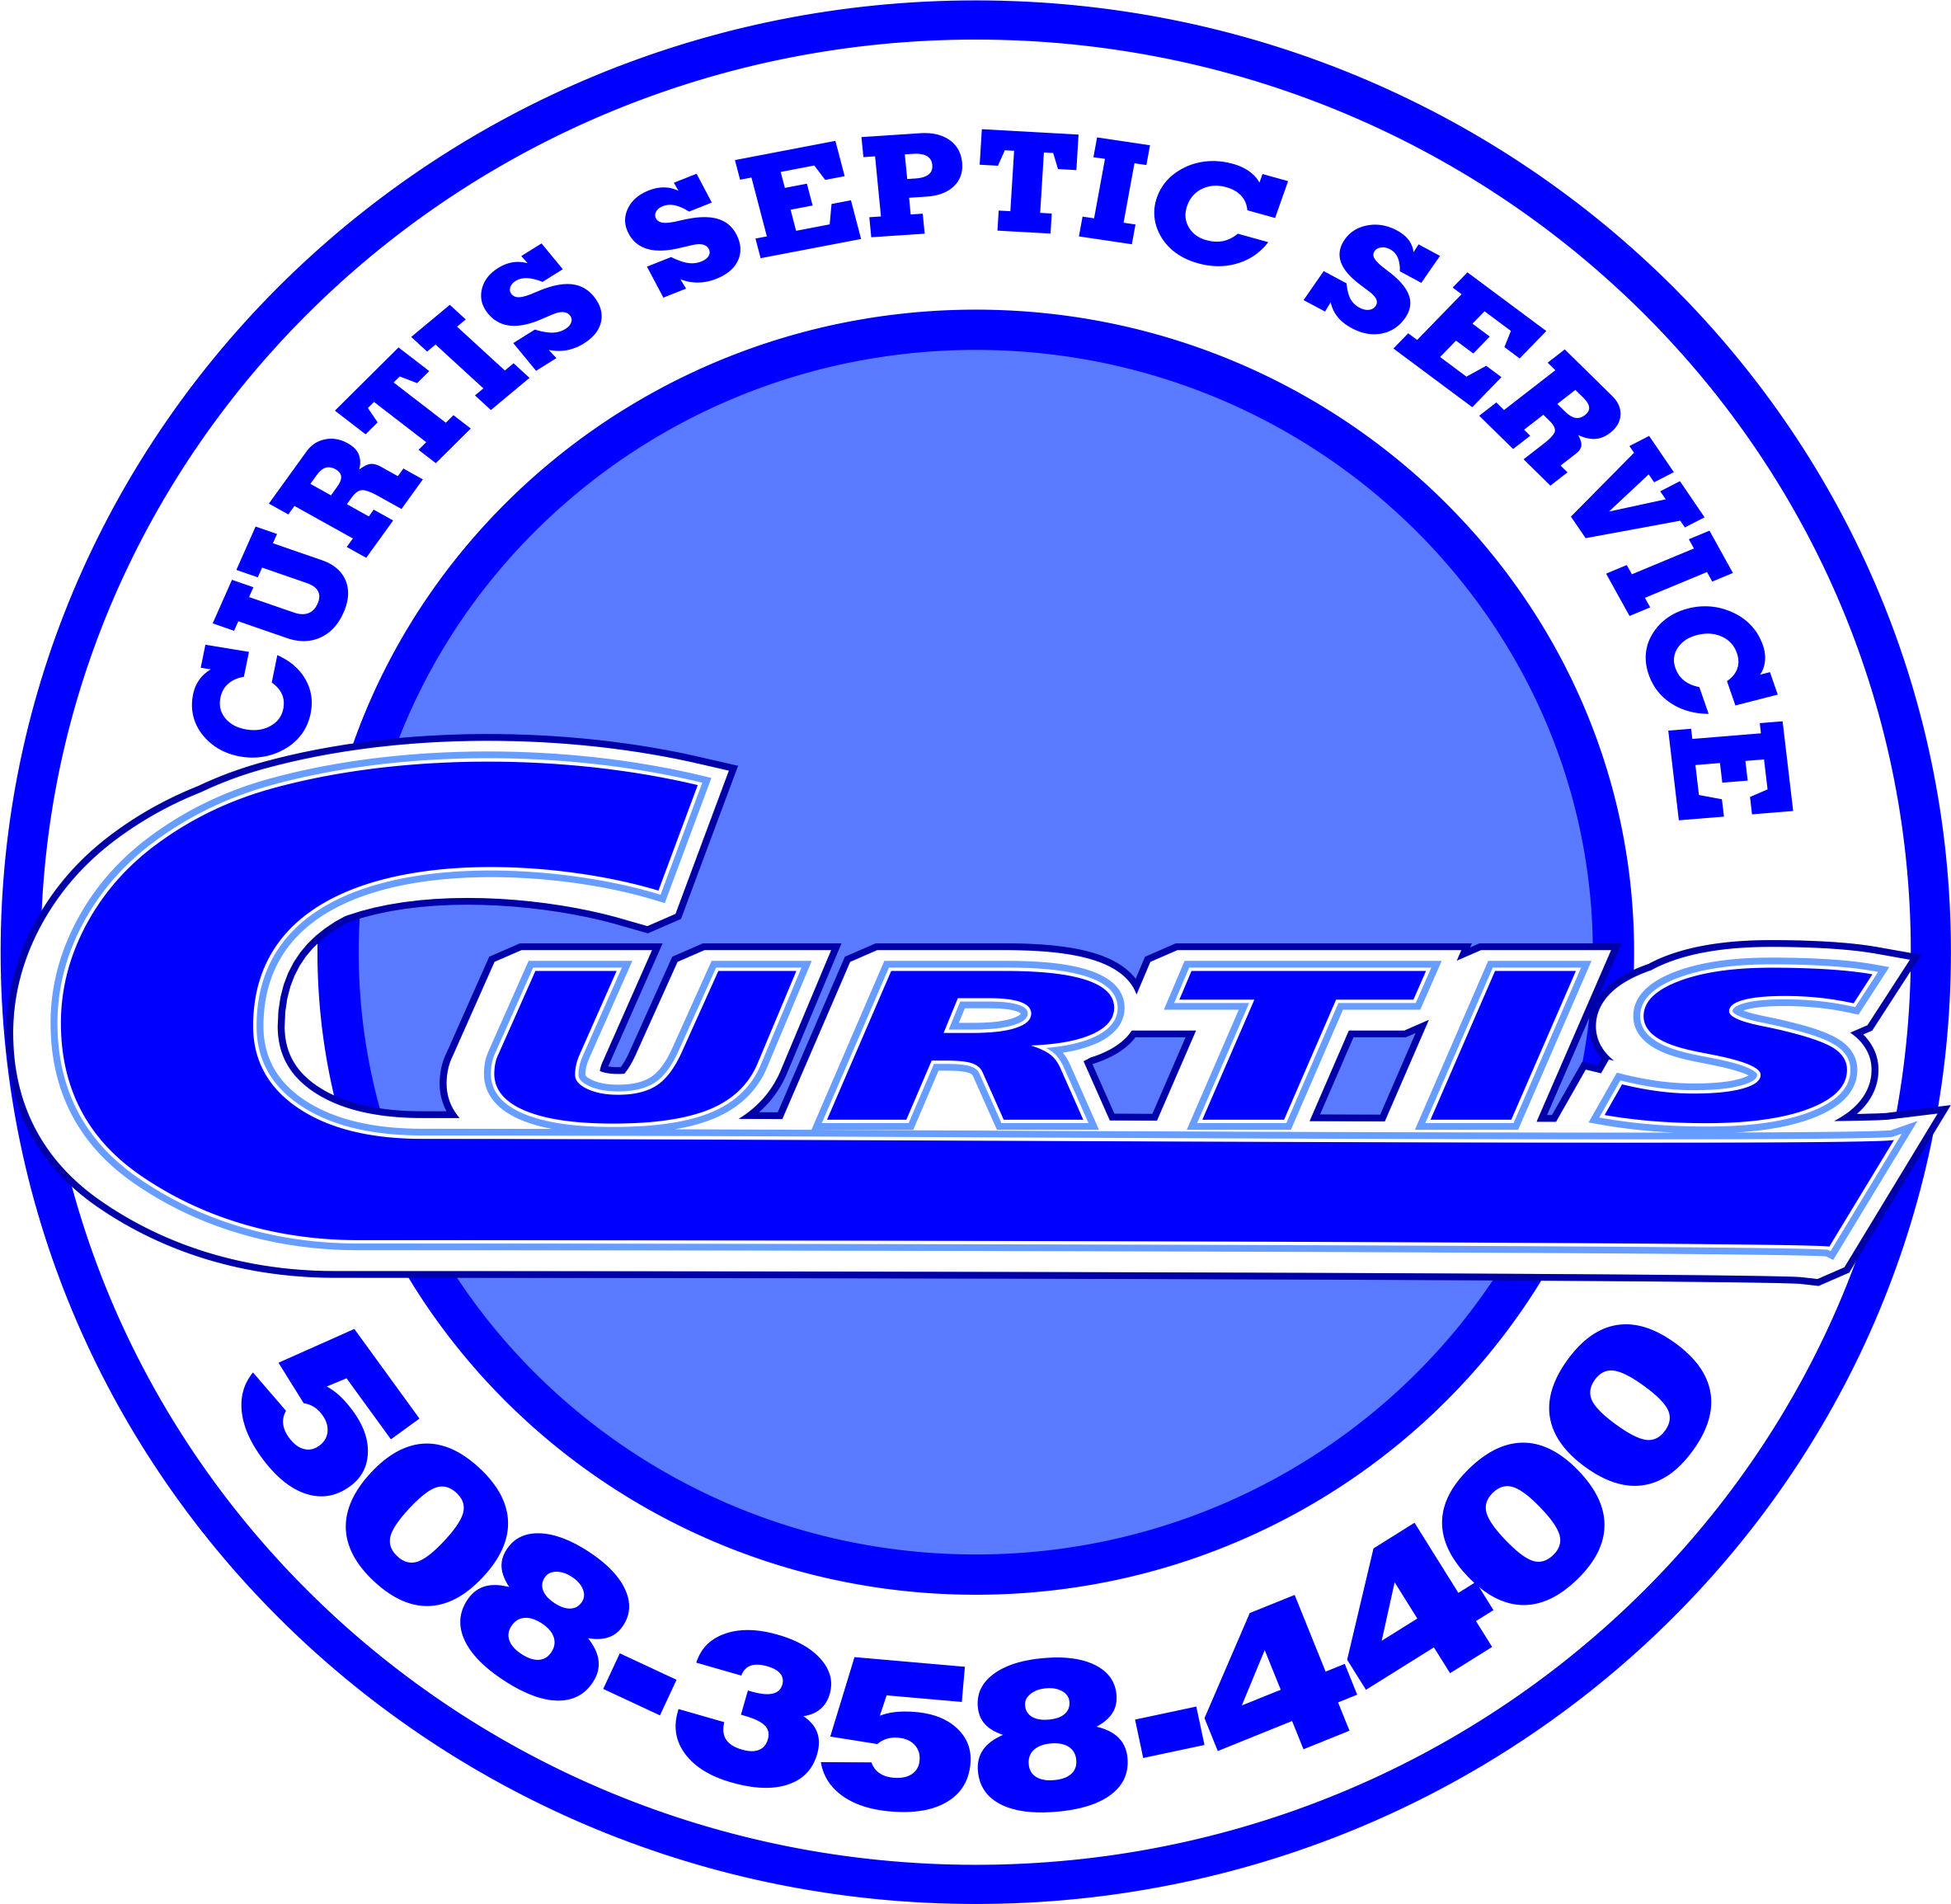 Septic system inspectors in Bellingham, MA.